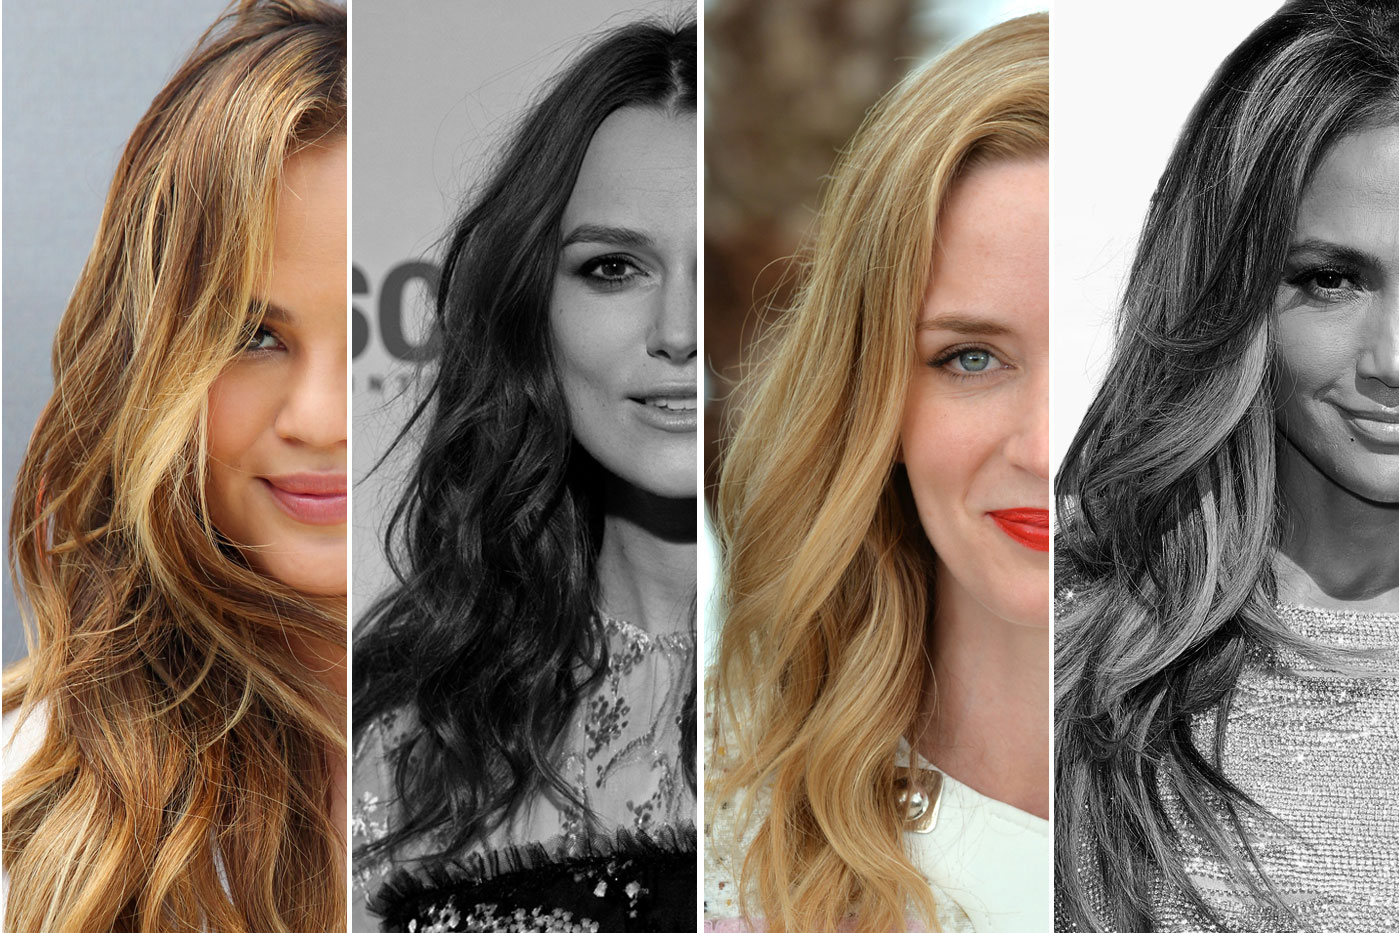 3 Summer Hairstyles That'll Get You That Coveted Beachy Wave - FabFitFun